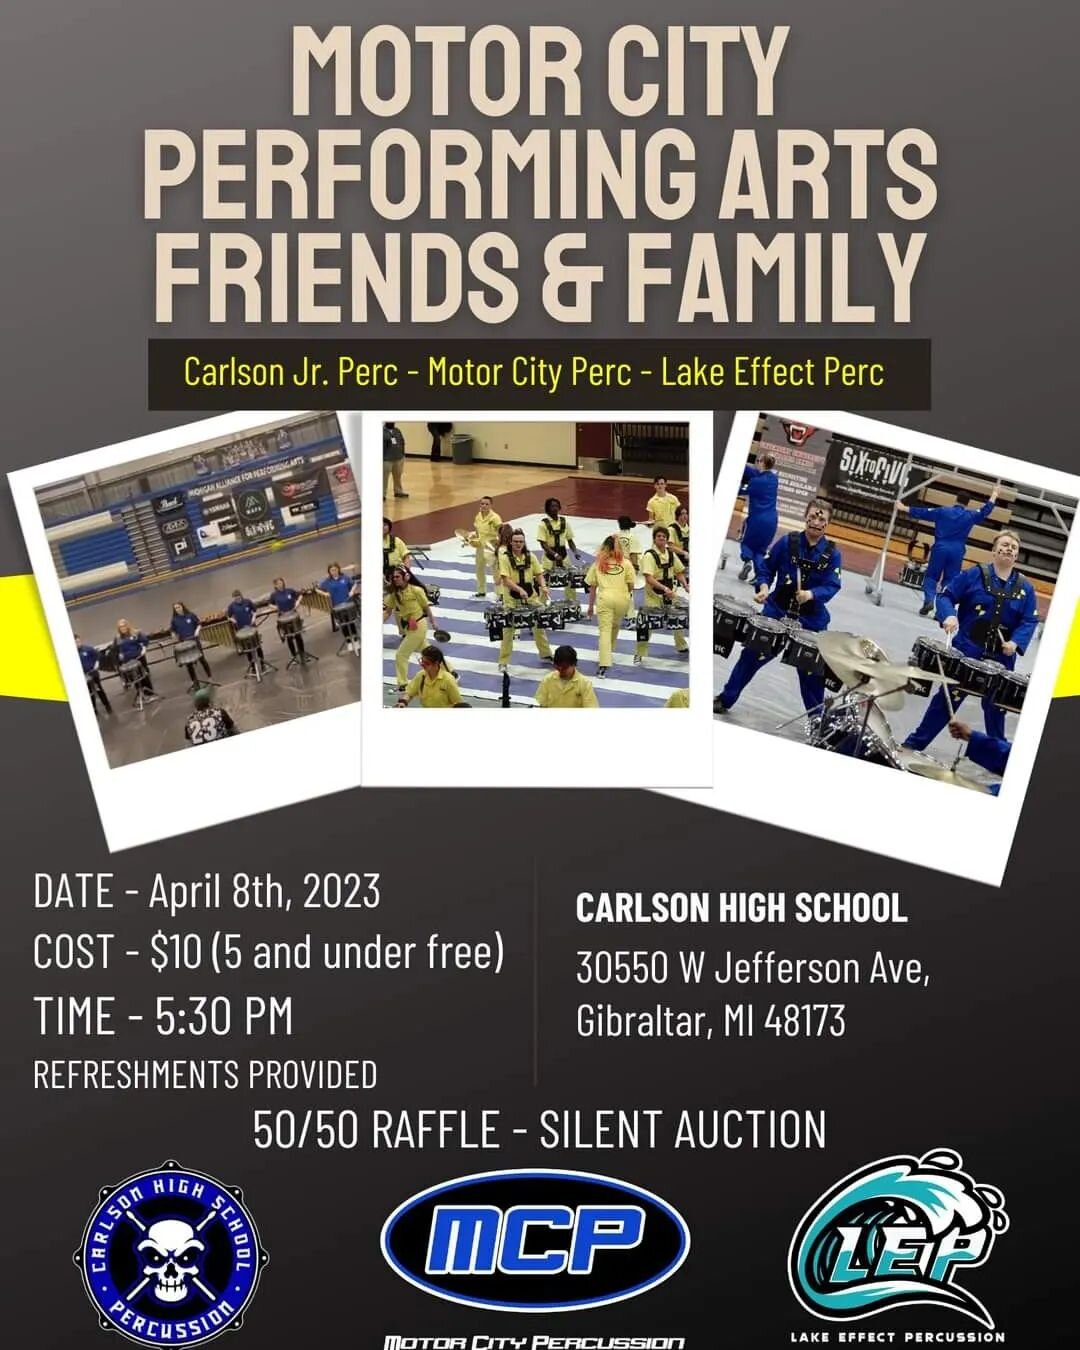 Join us THIS SATURDAY for our annual Motor City Performing Arts Friends and Family Show hosted at Carlson High School! This will be your last chance to catch us in Michigan before we head to WGI World Championships! SEE YOU THERE!

#MCP23 #vicfirth #